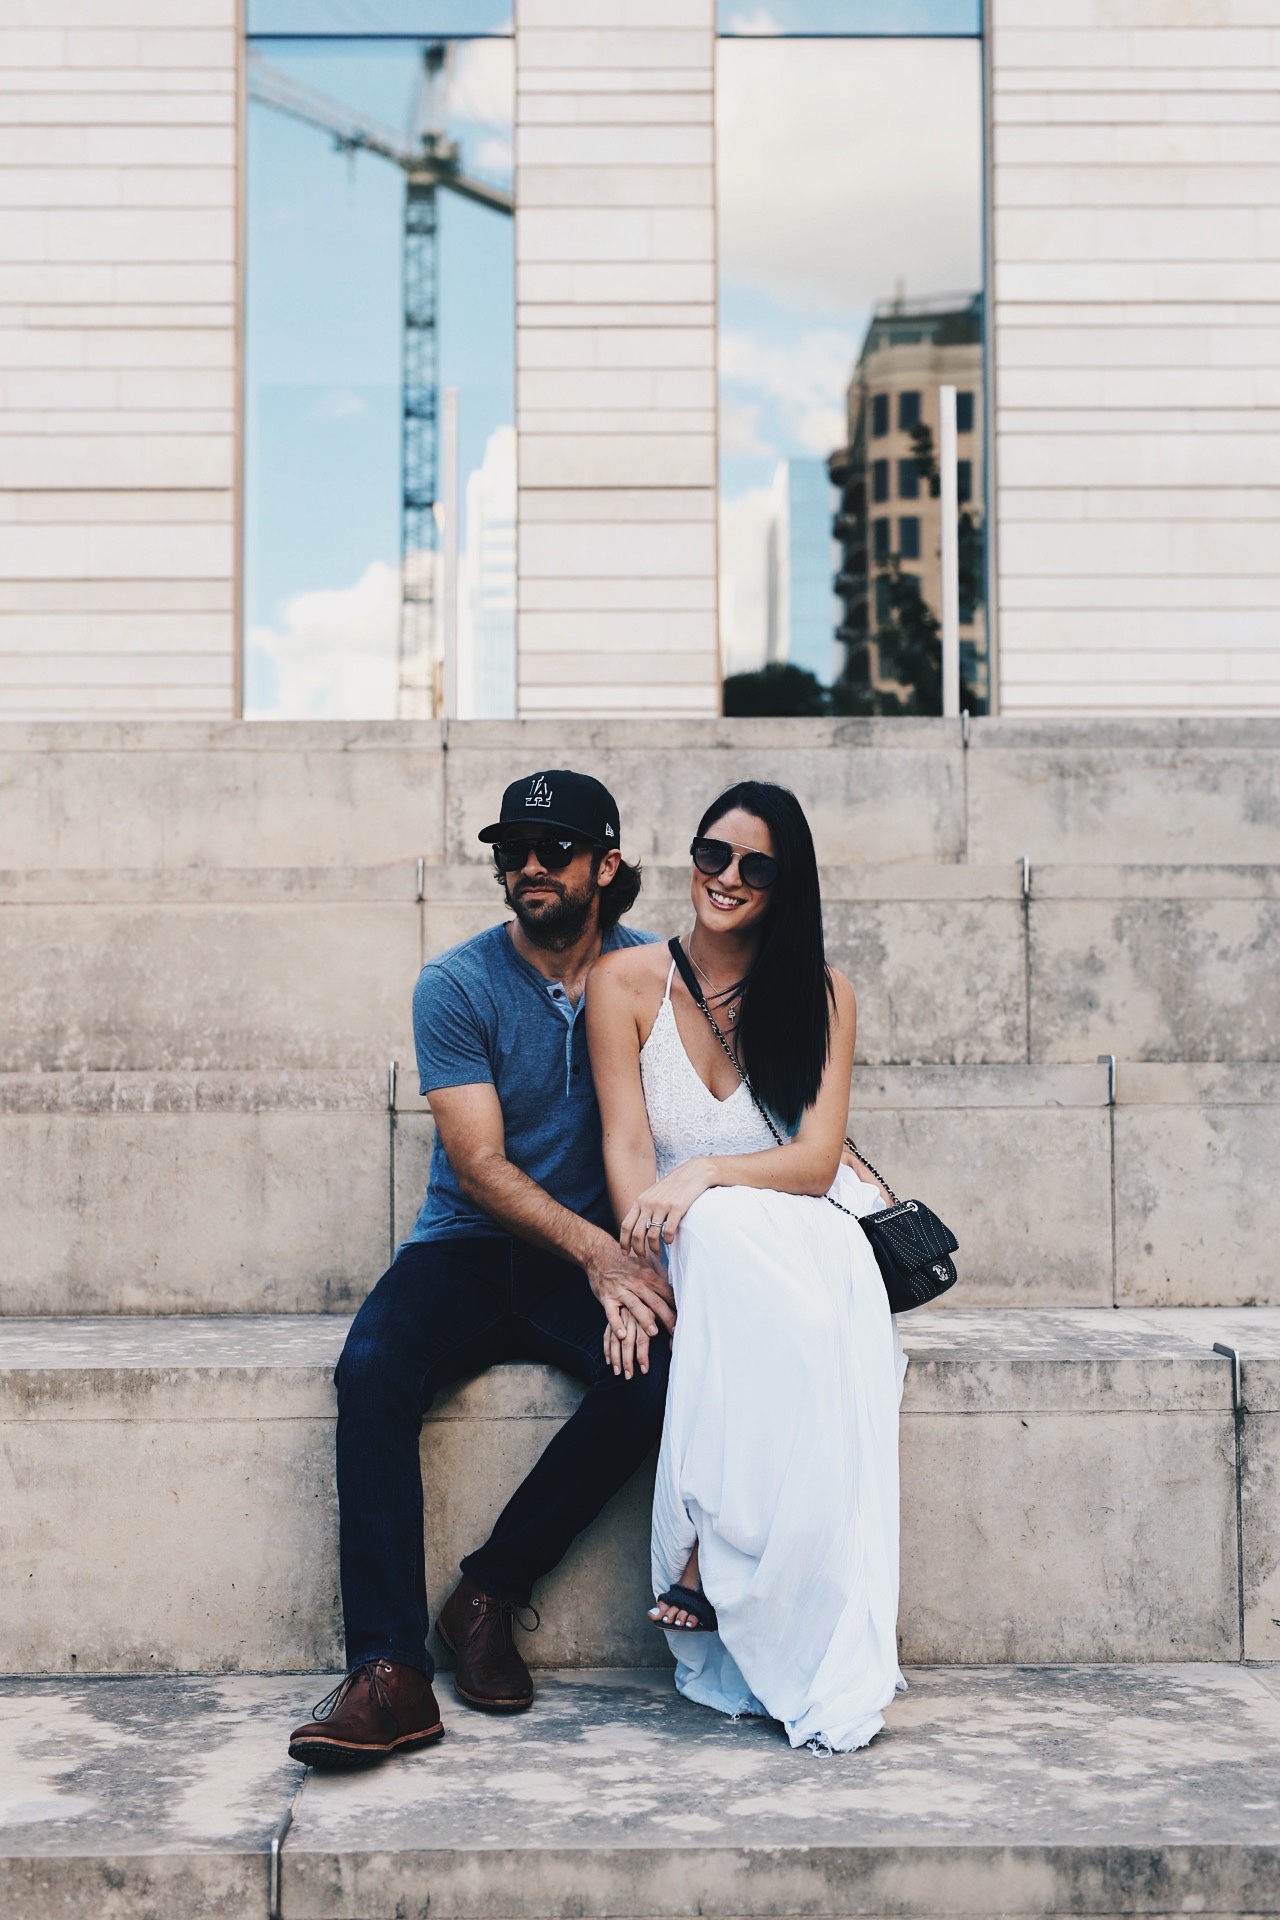 Austin Blogger DTKAustin's husband is spilling the beans on what it's like being an Instagram Husband and being married to a fashion blogger and stylist. | anniversary photo ideas | styling for an anniversary shoot | anniversary photo shoot fashion tips | what to wear for an anniversary photo shoot | how to style a maxi dress | couples fashion | his and her summer fashion || Dressed to Kill